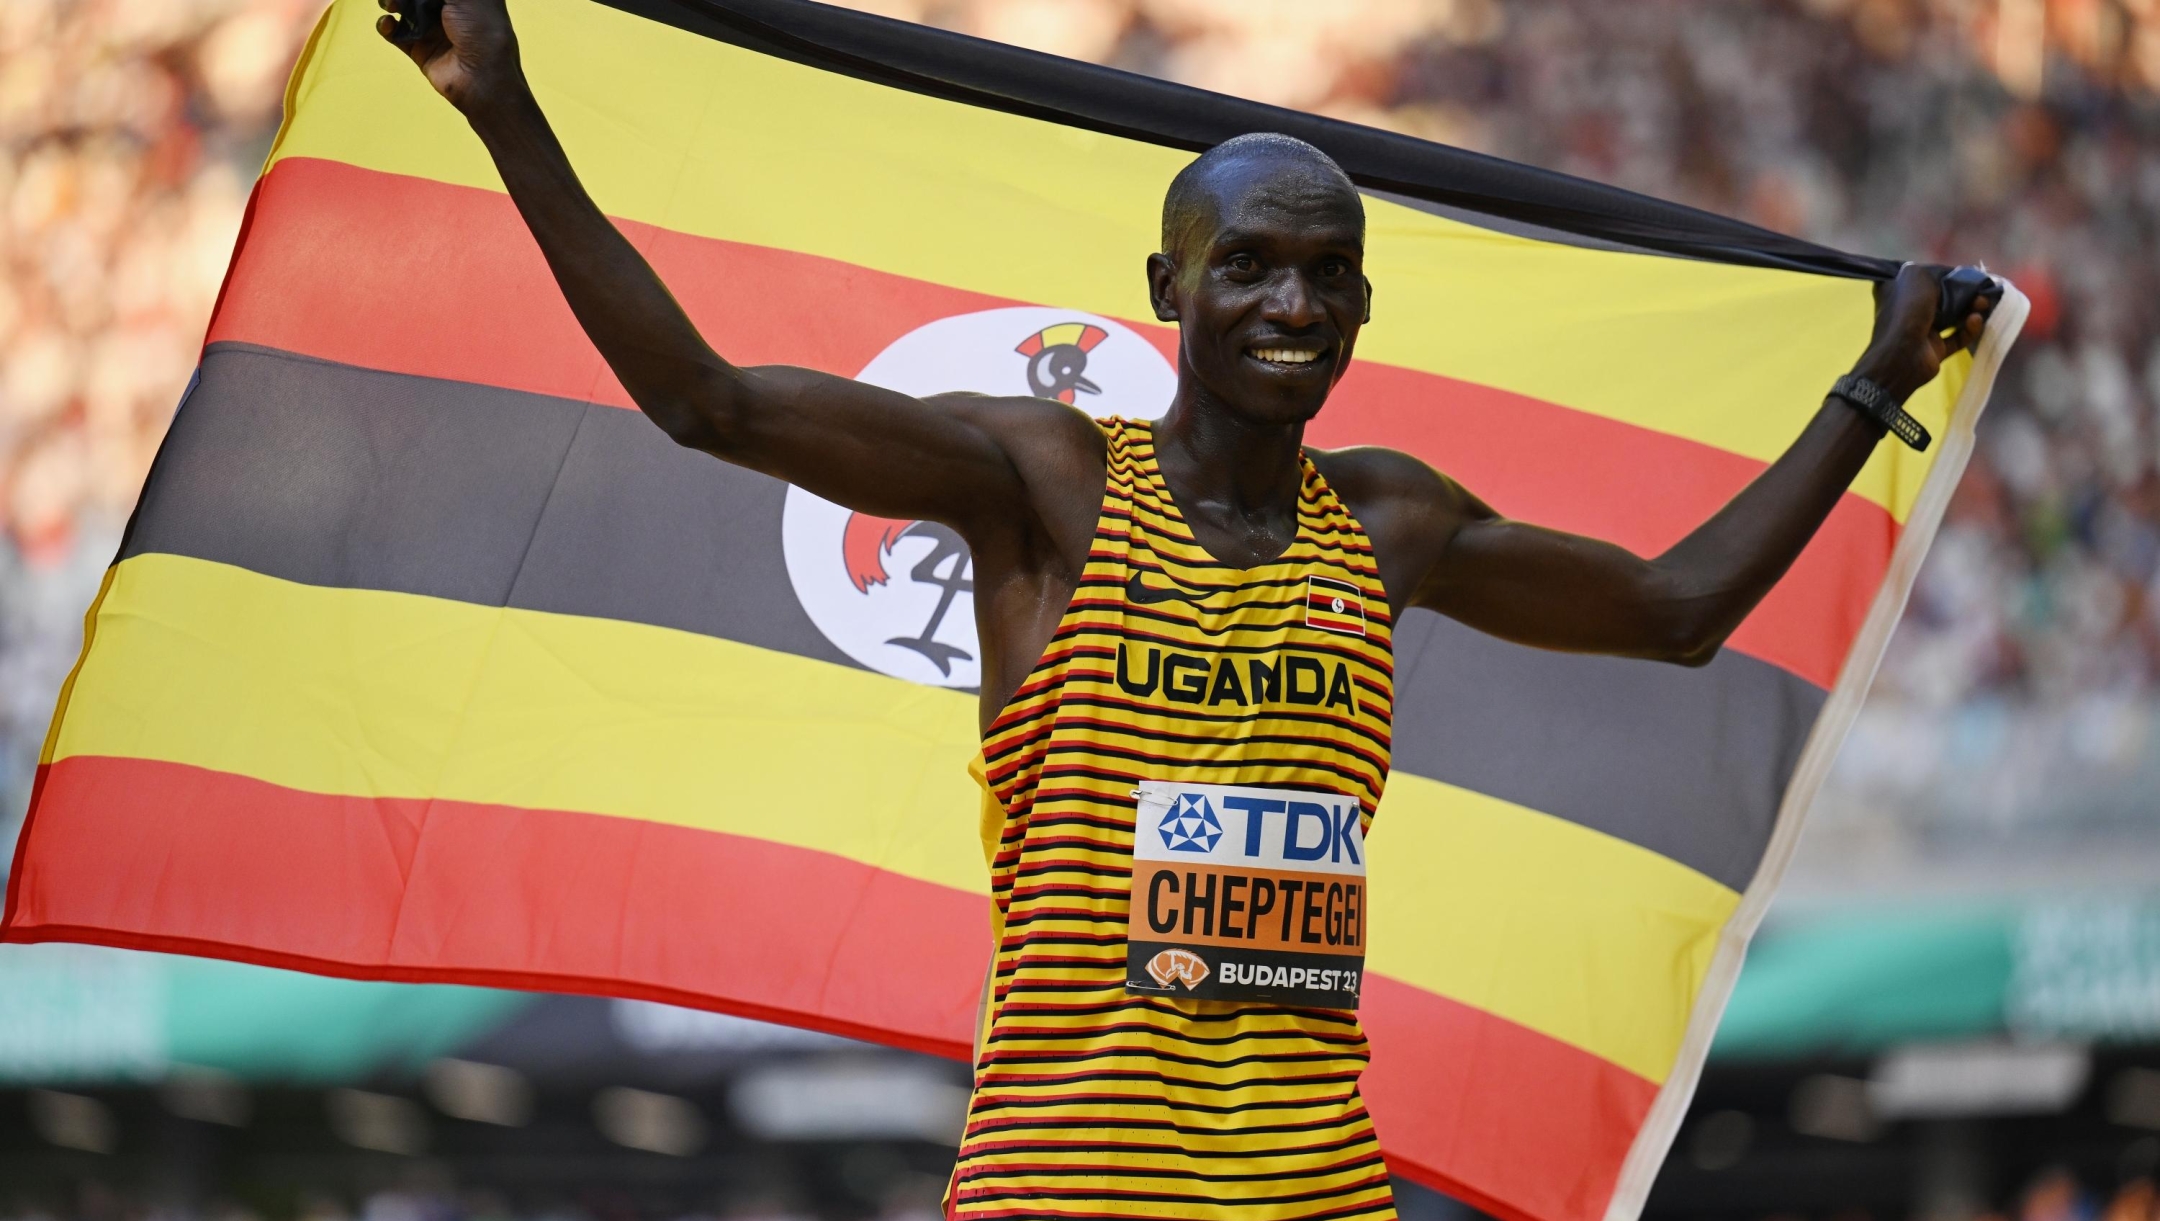 BUDAPEST, HUNGARY - AUGUST 20: Joshua Cheptegei of Team Uganda reacts after winning gold in the Men's 10,000m Final during day two of the World Athletics Championships Budapest 2023 at National Athletics Centre on August 20, 2023 in Budapest, Hungary. (Photo by Shaun Botterill/Getty Images)